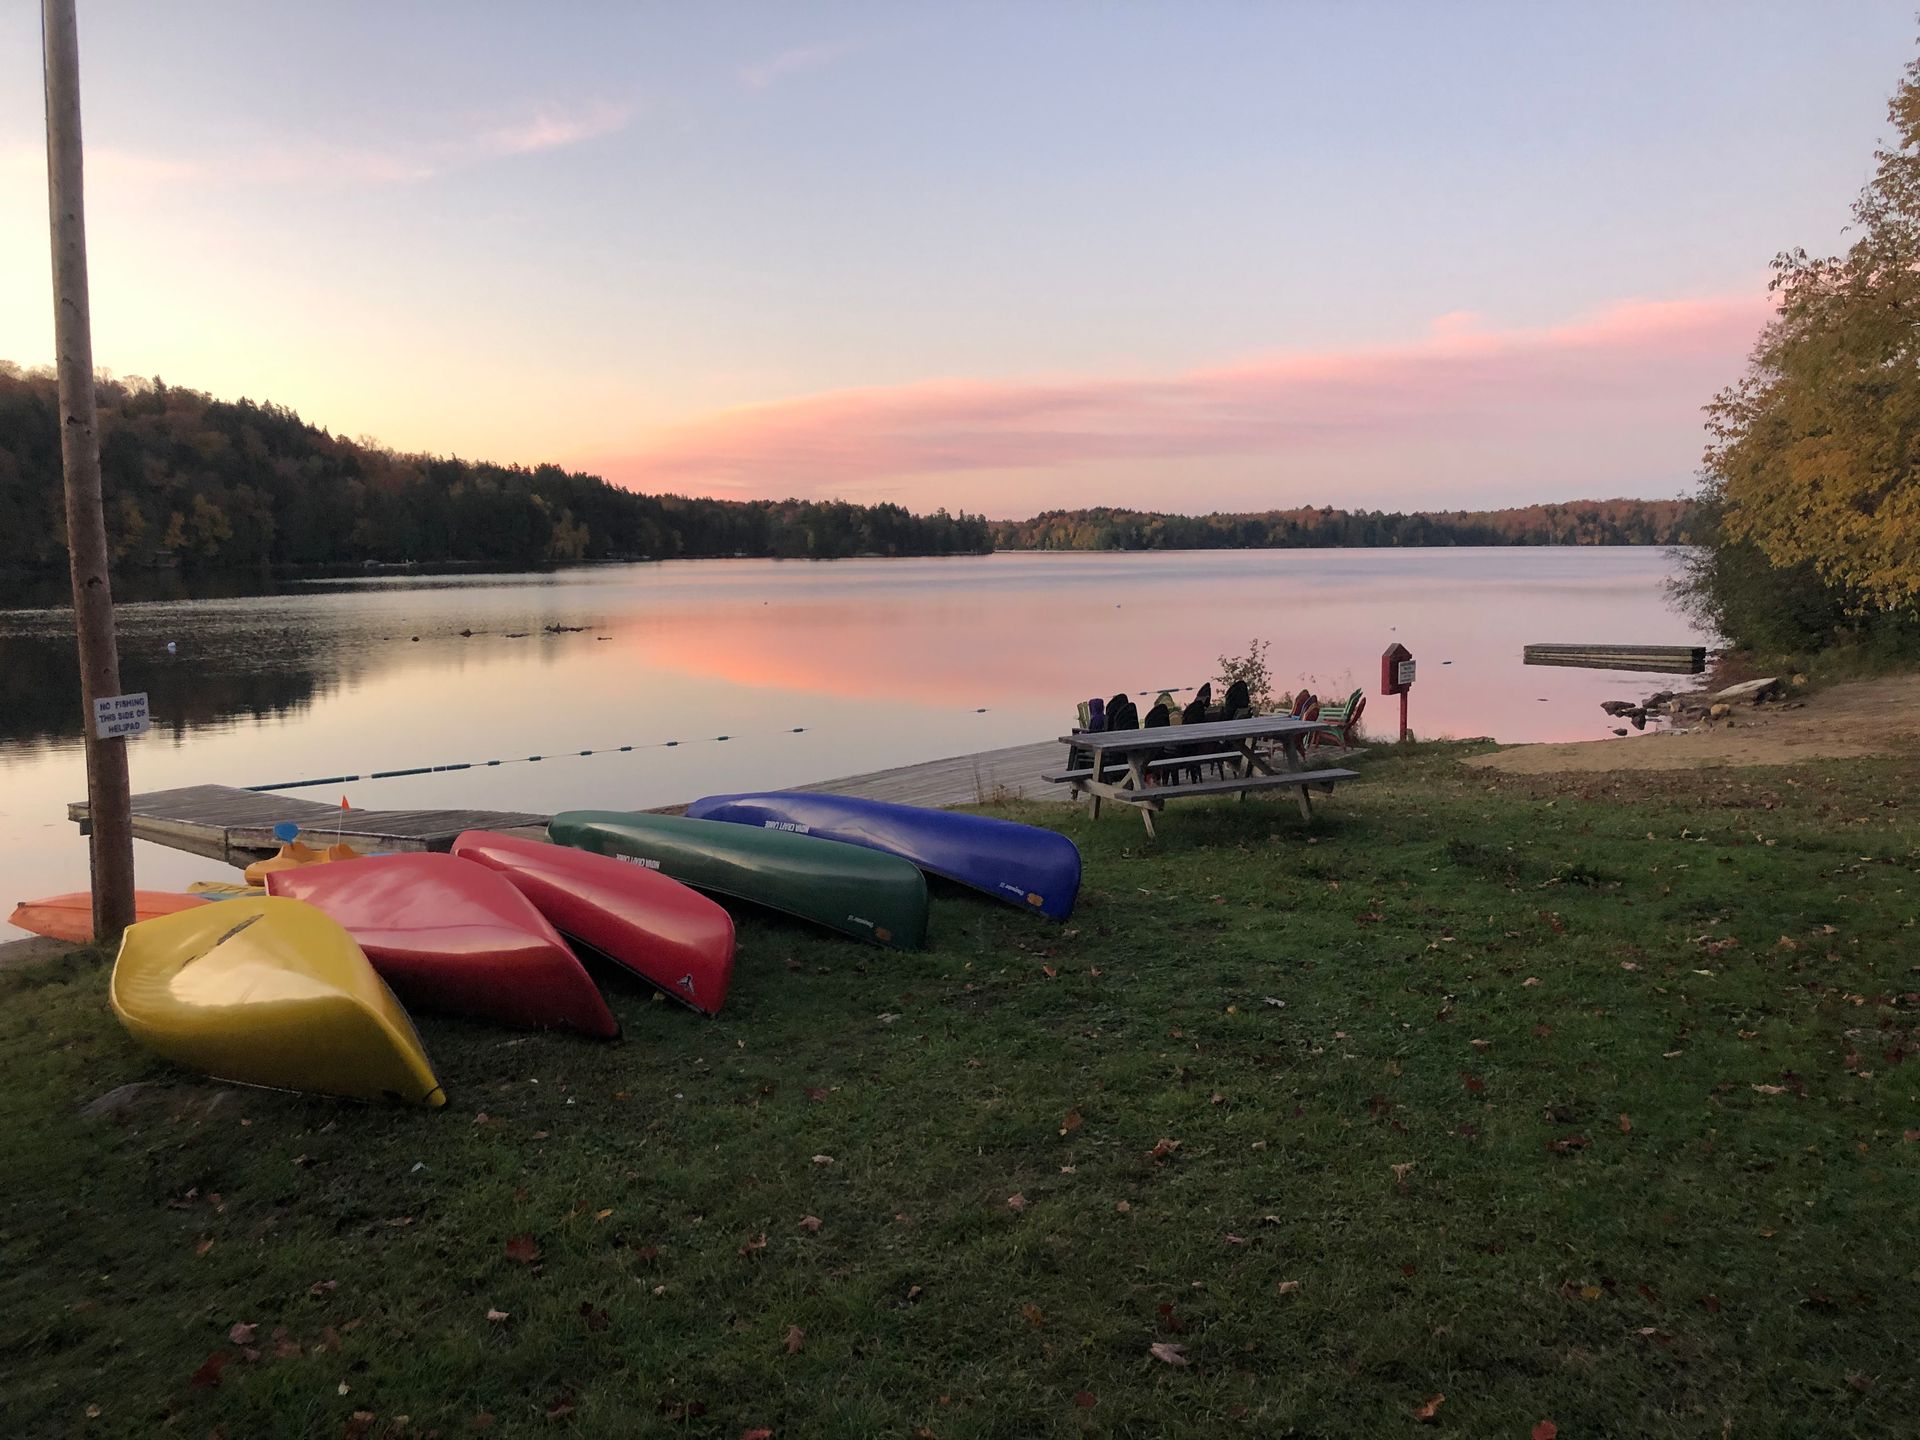 A group of kayaks are sitting on the grass near a lake at sunset.